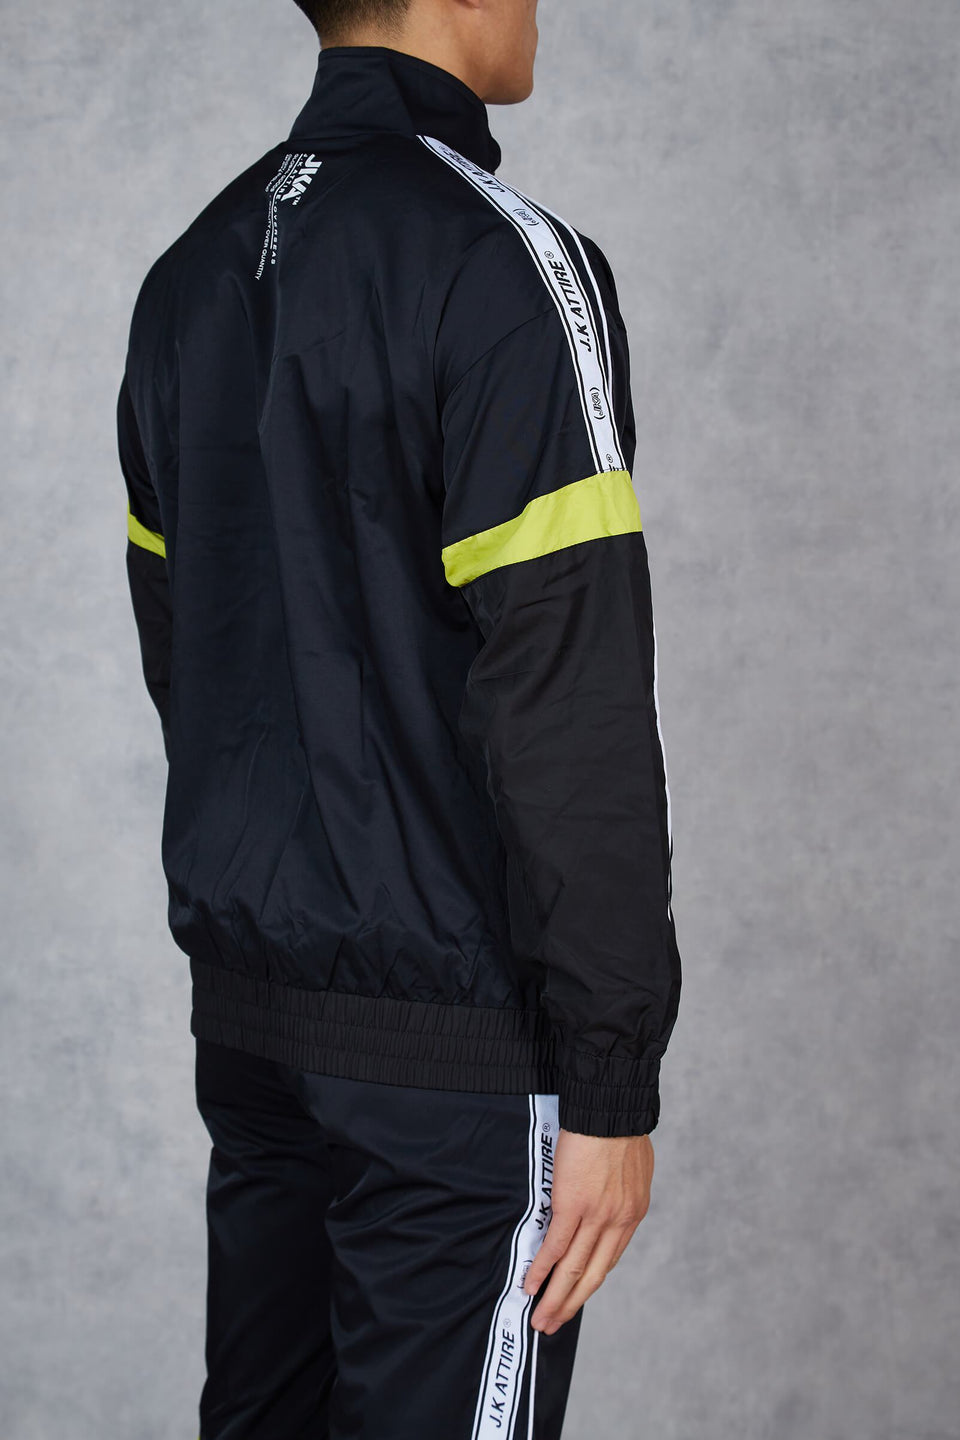 Section Retro Taped Tracksuit Jacket - Neon/Black